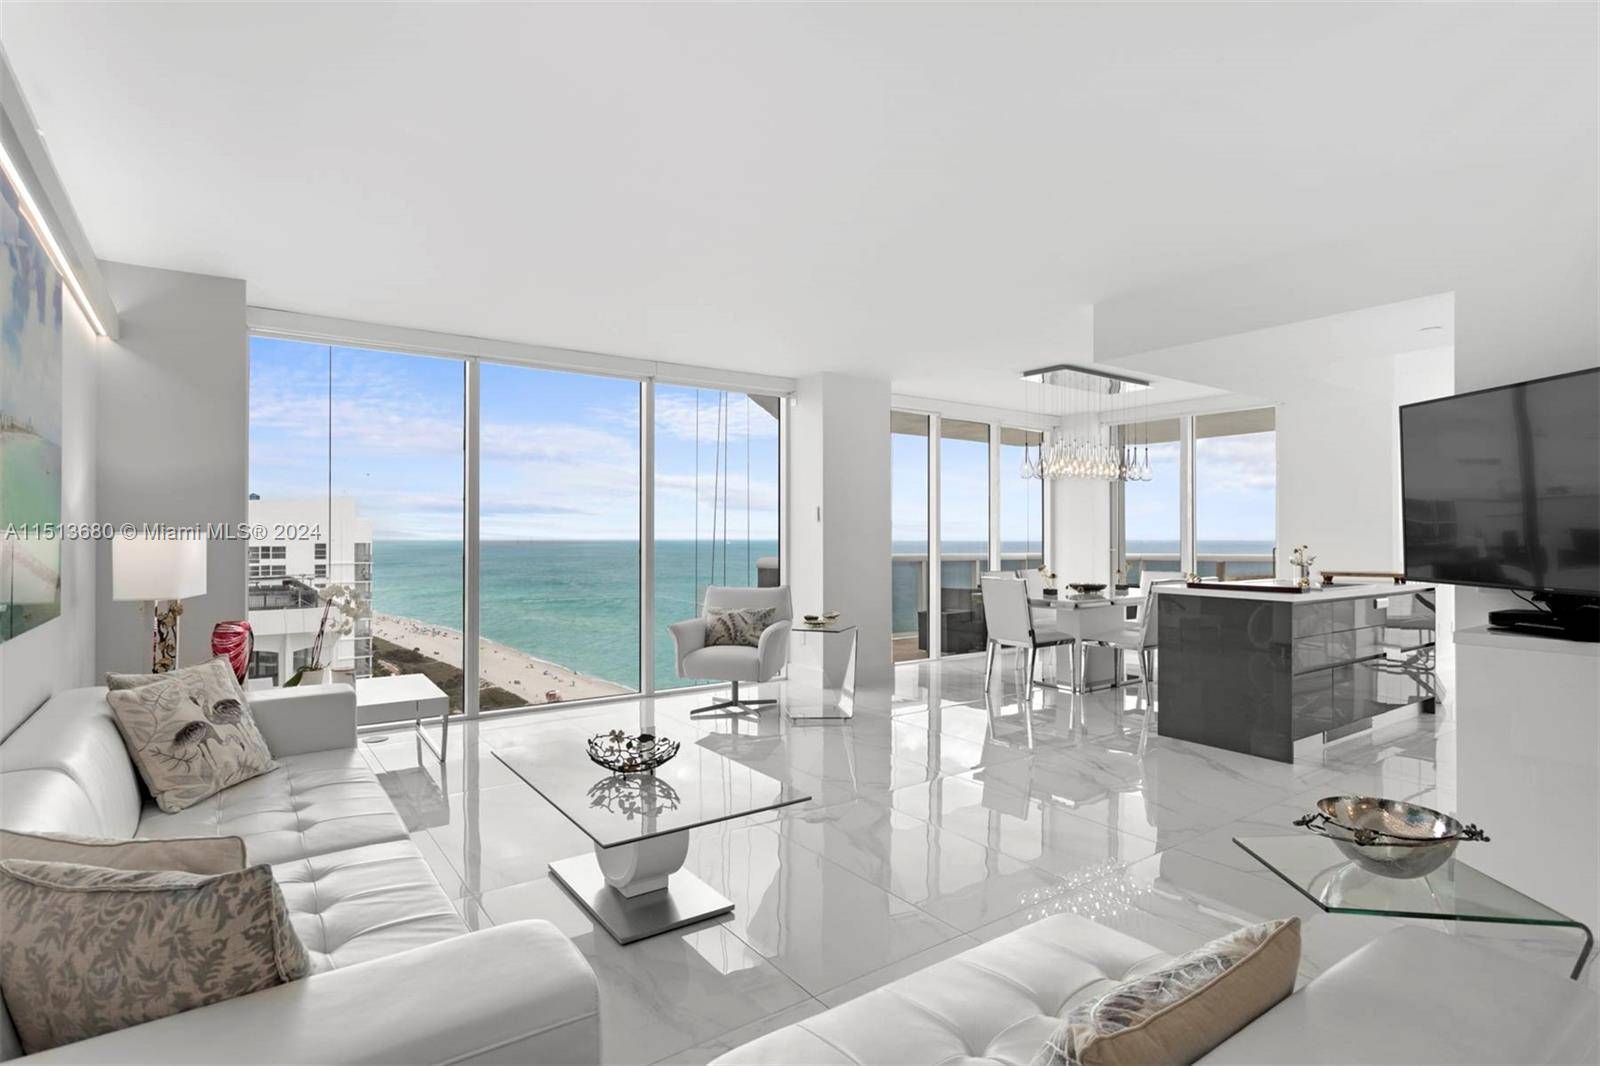 This remodeled 3 bedroom, 3 bathroom home spans 1, 980 square feet, complemented by two expansive terraces that offer breathtaking direct oceanfront, bay, and intracoastal views.